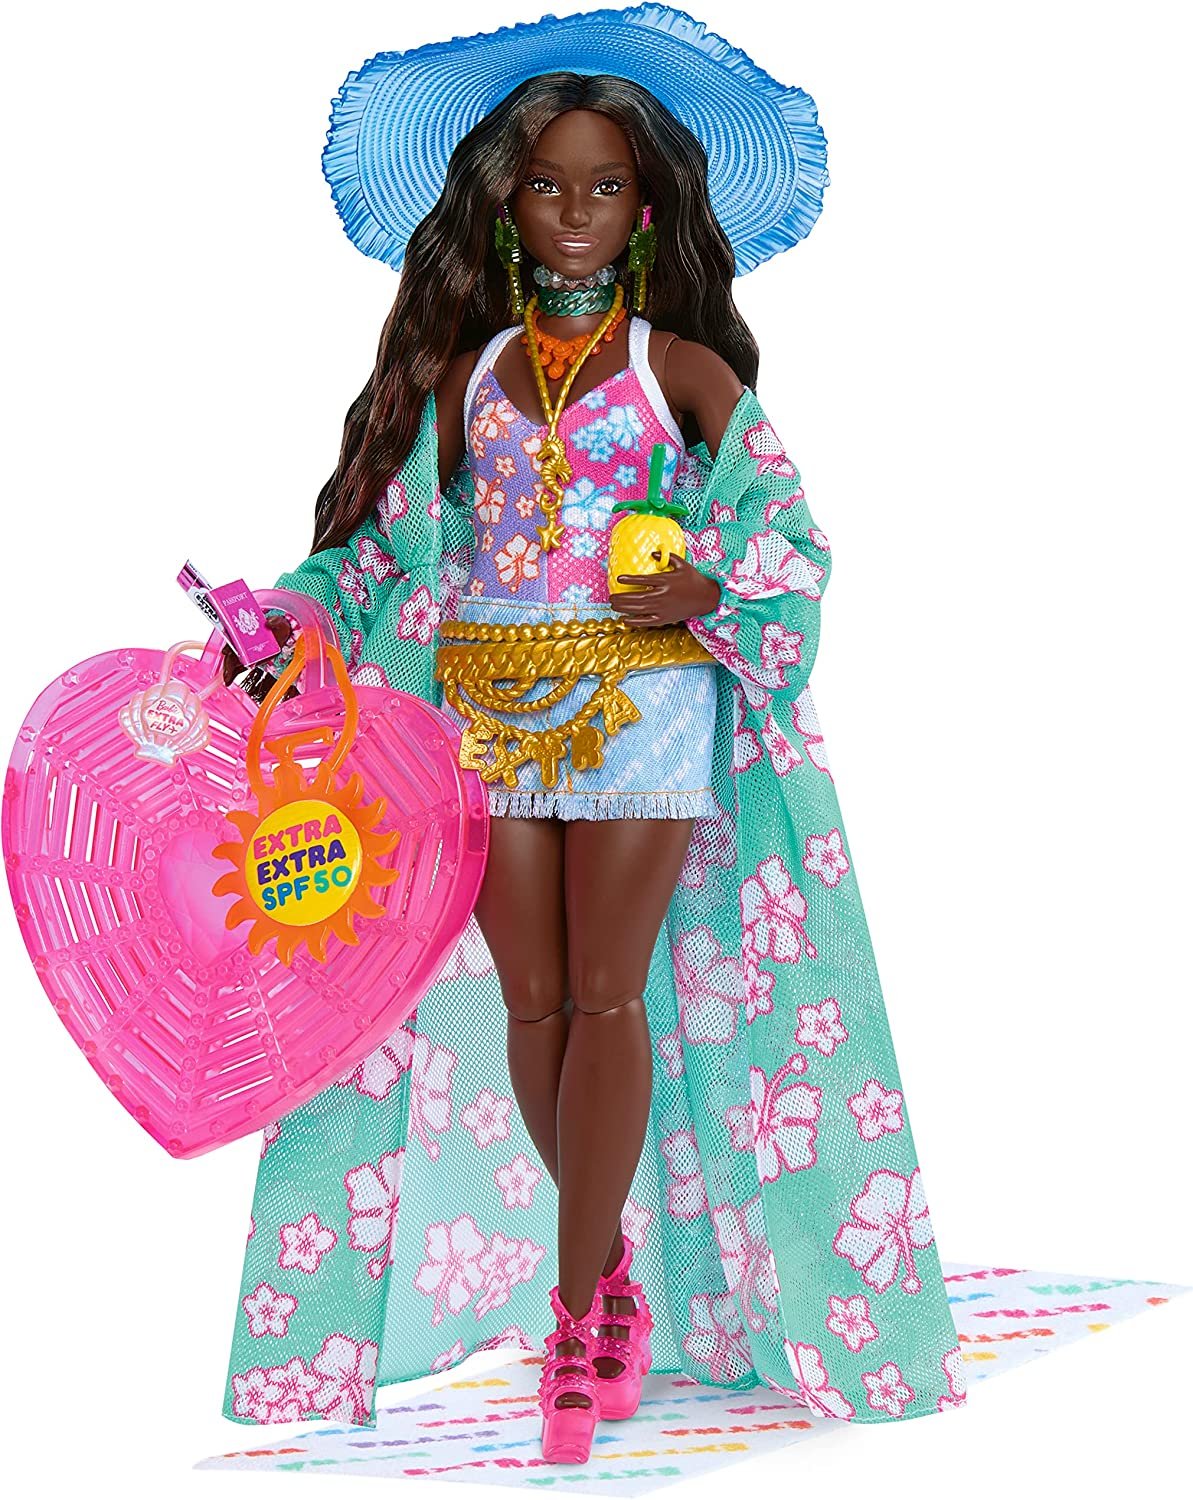 1682923797-youloveit-com-barbie-extra-fly-beach-doll1